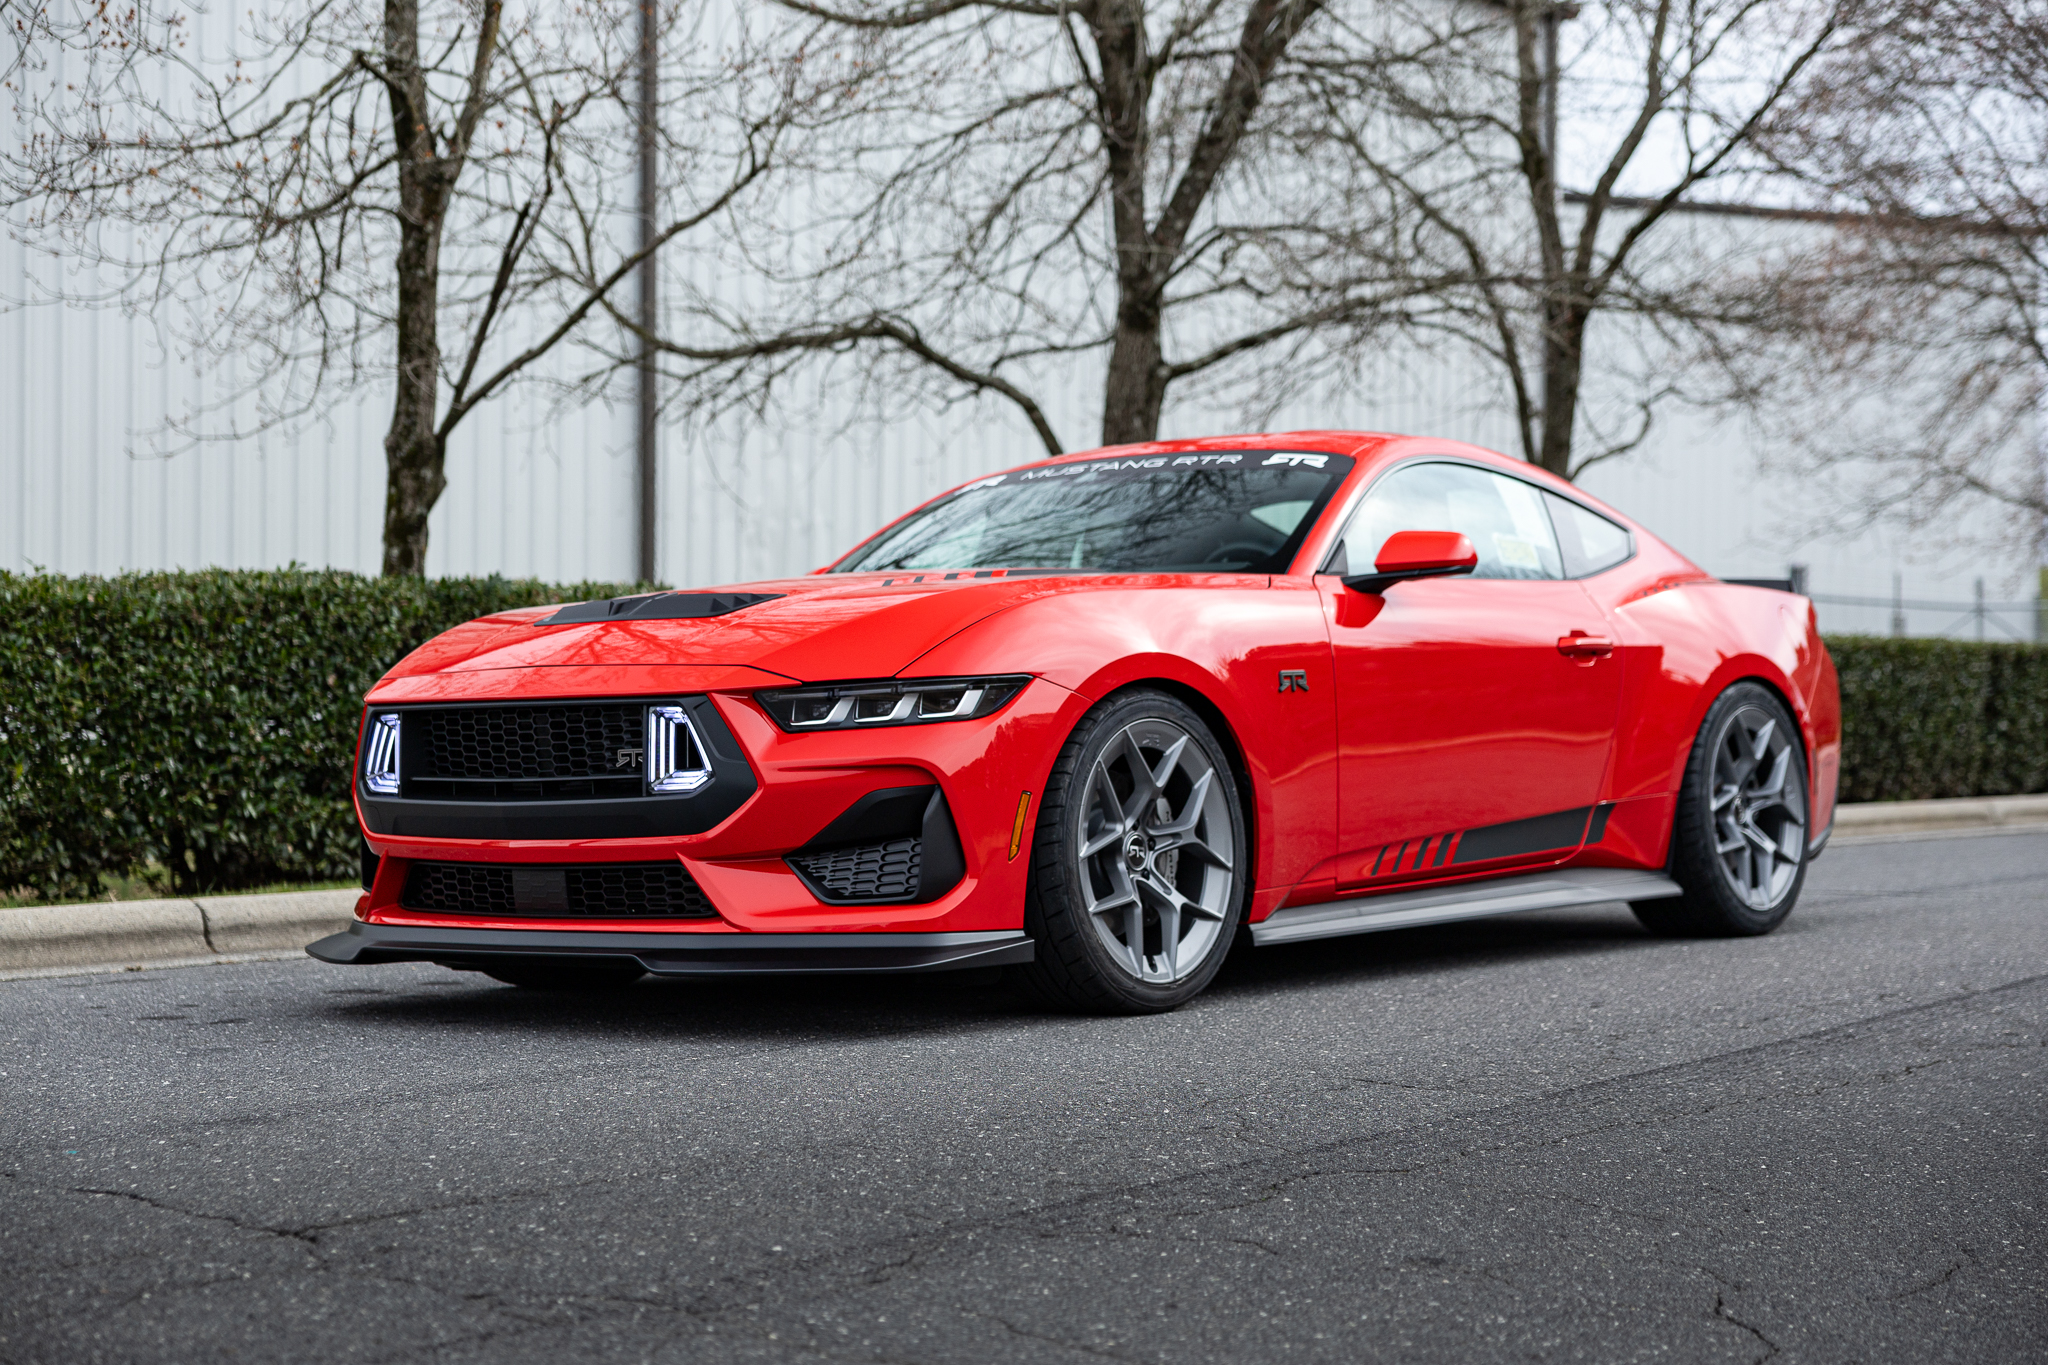 S650 Mustang New RTR Wheels! // RTR Aero 5 Wheels Available in 2 New Colors! JCOL9712-2